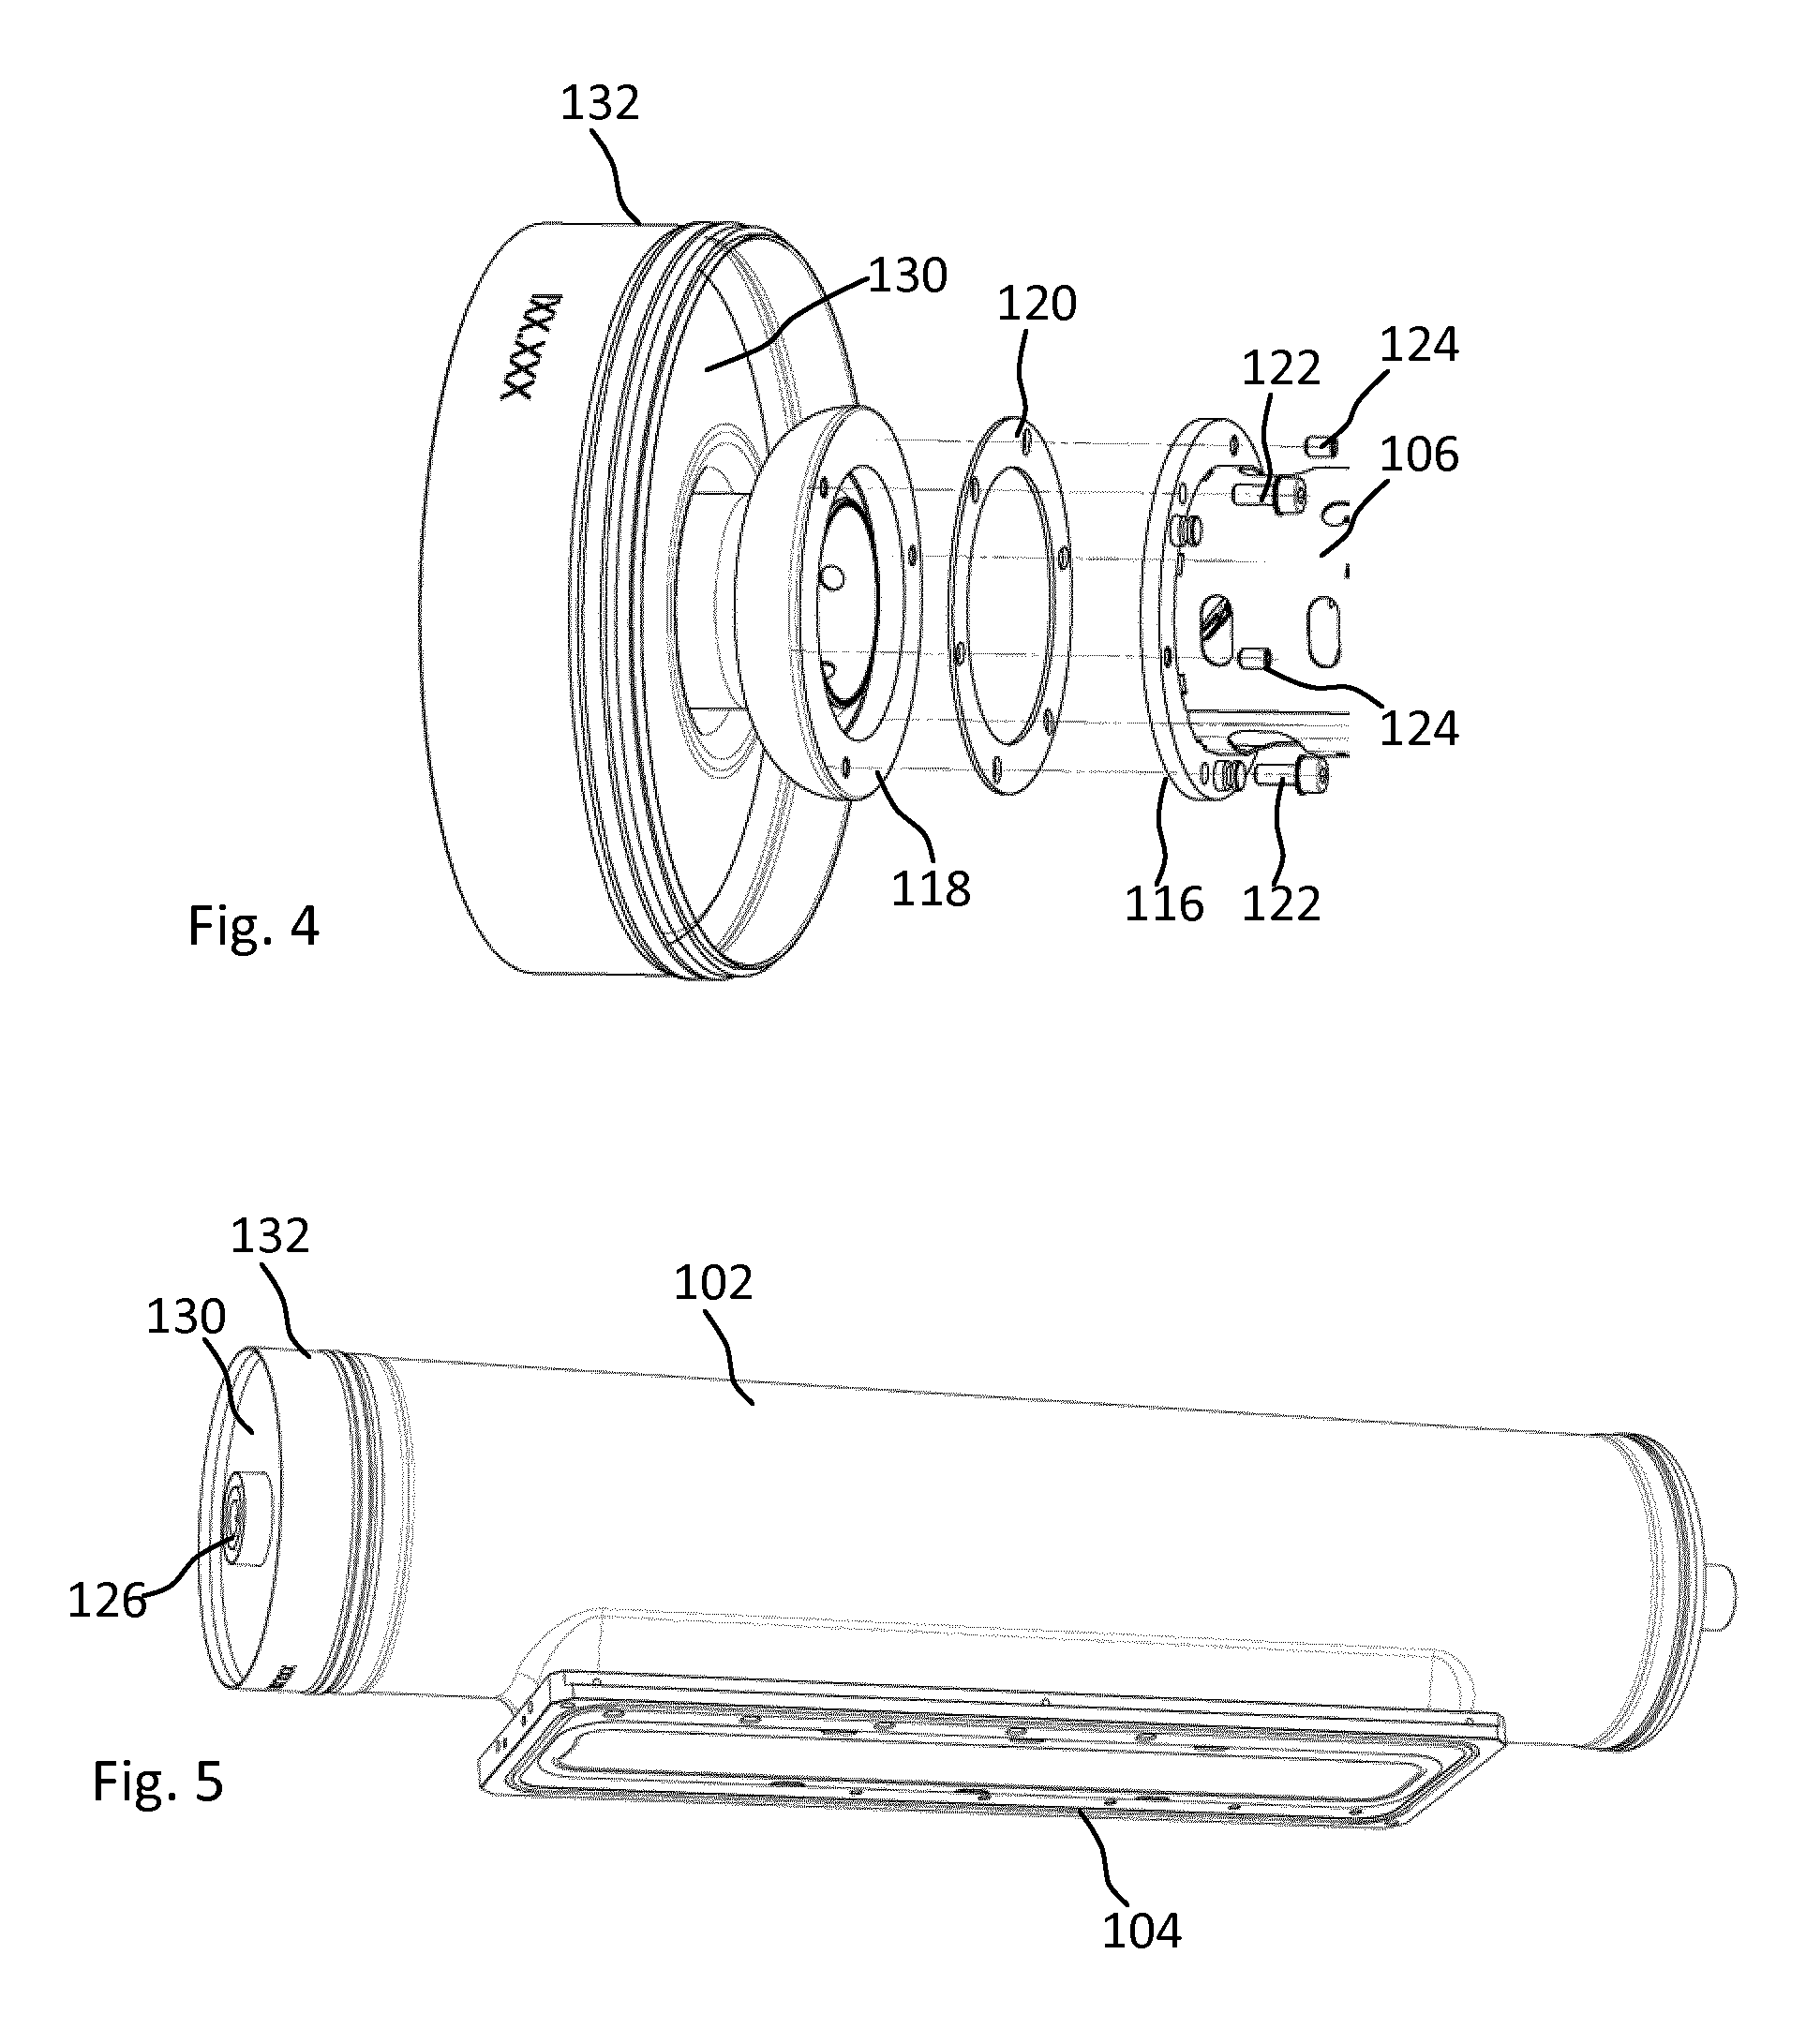 Cathode housing suspension of an electron beam device